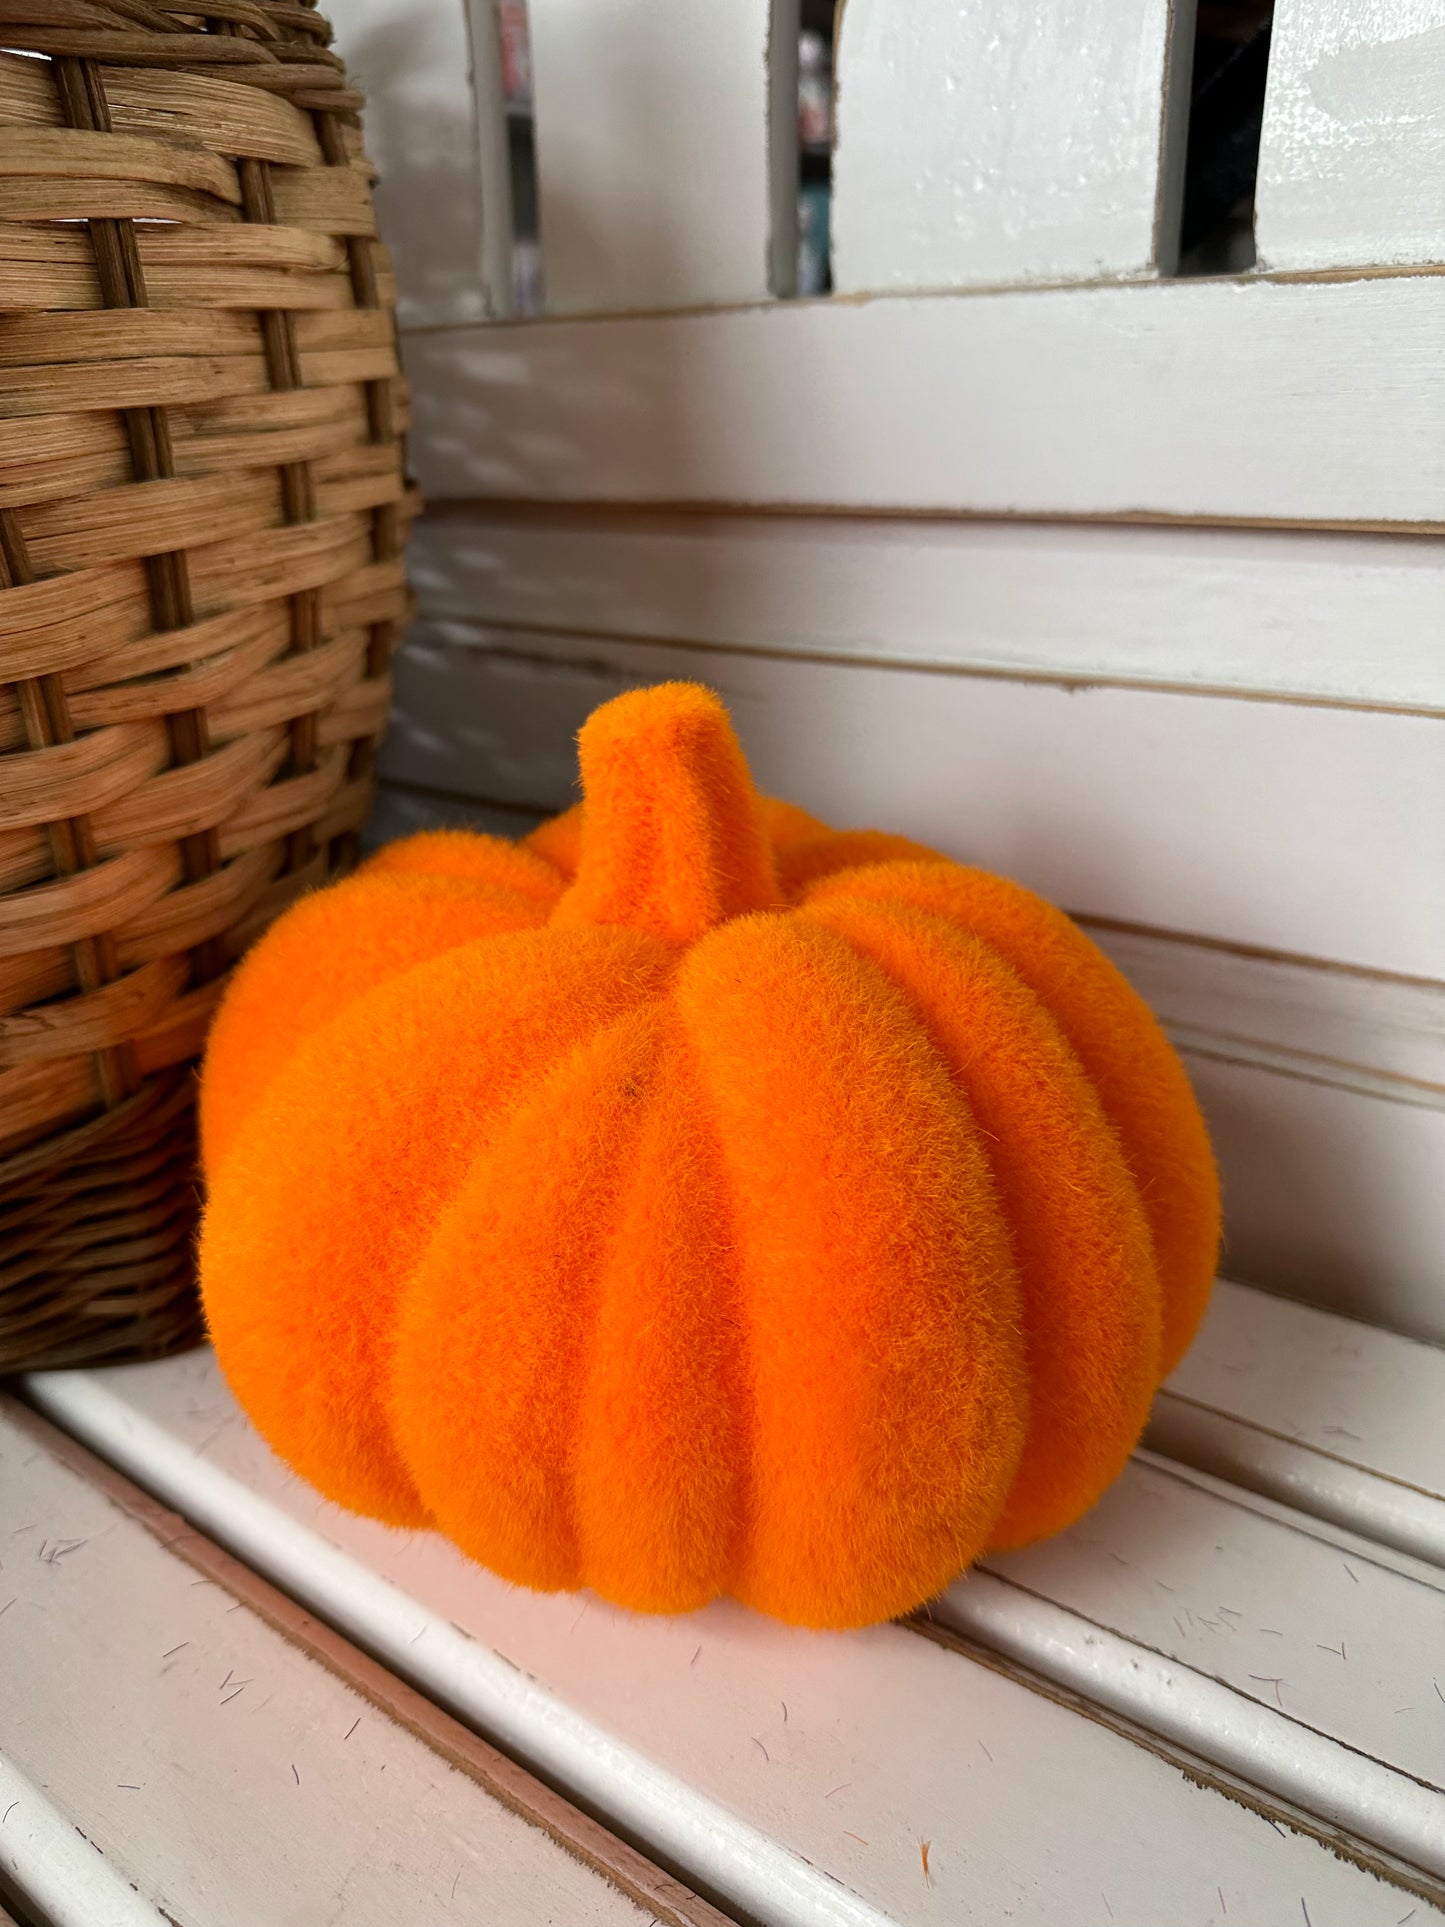 Flocked Pumpkin With Stem Four Assorted Colors 7.5 Inch